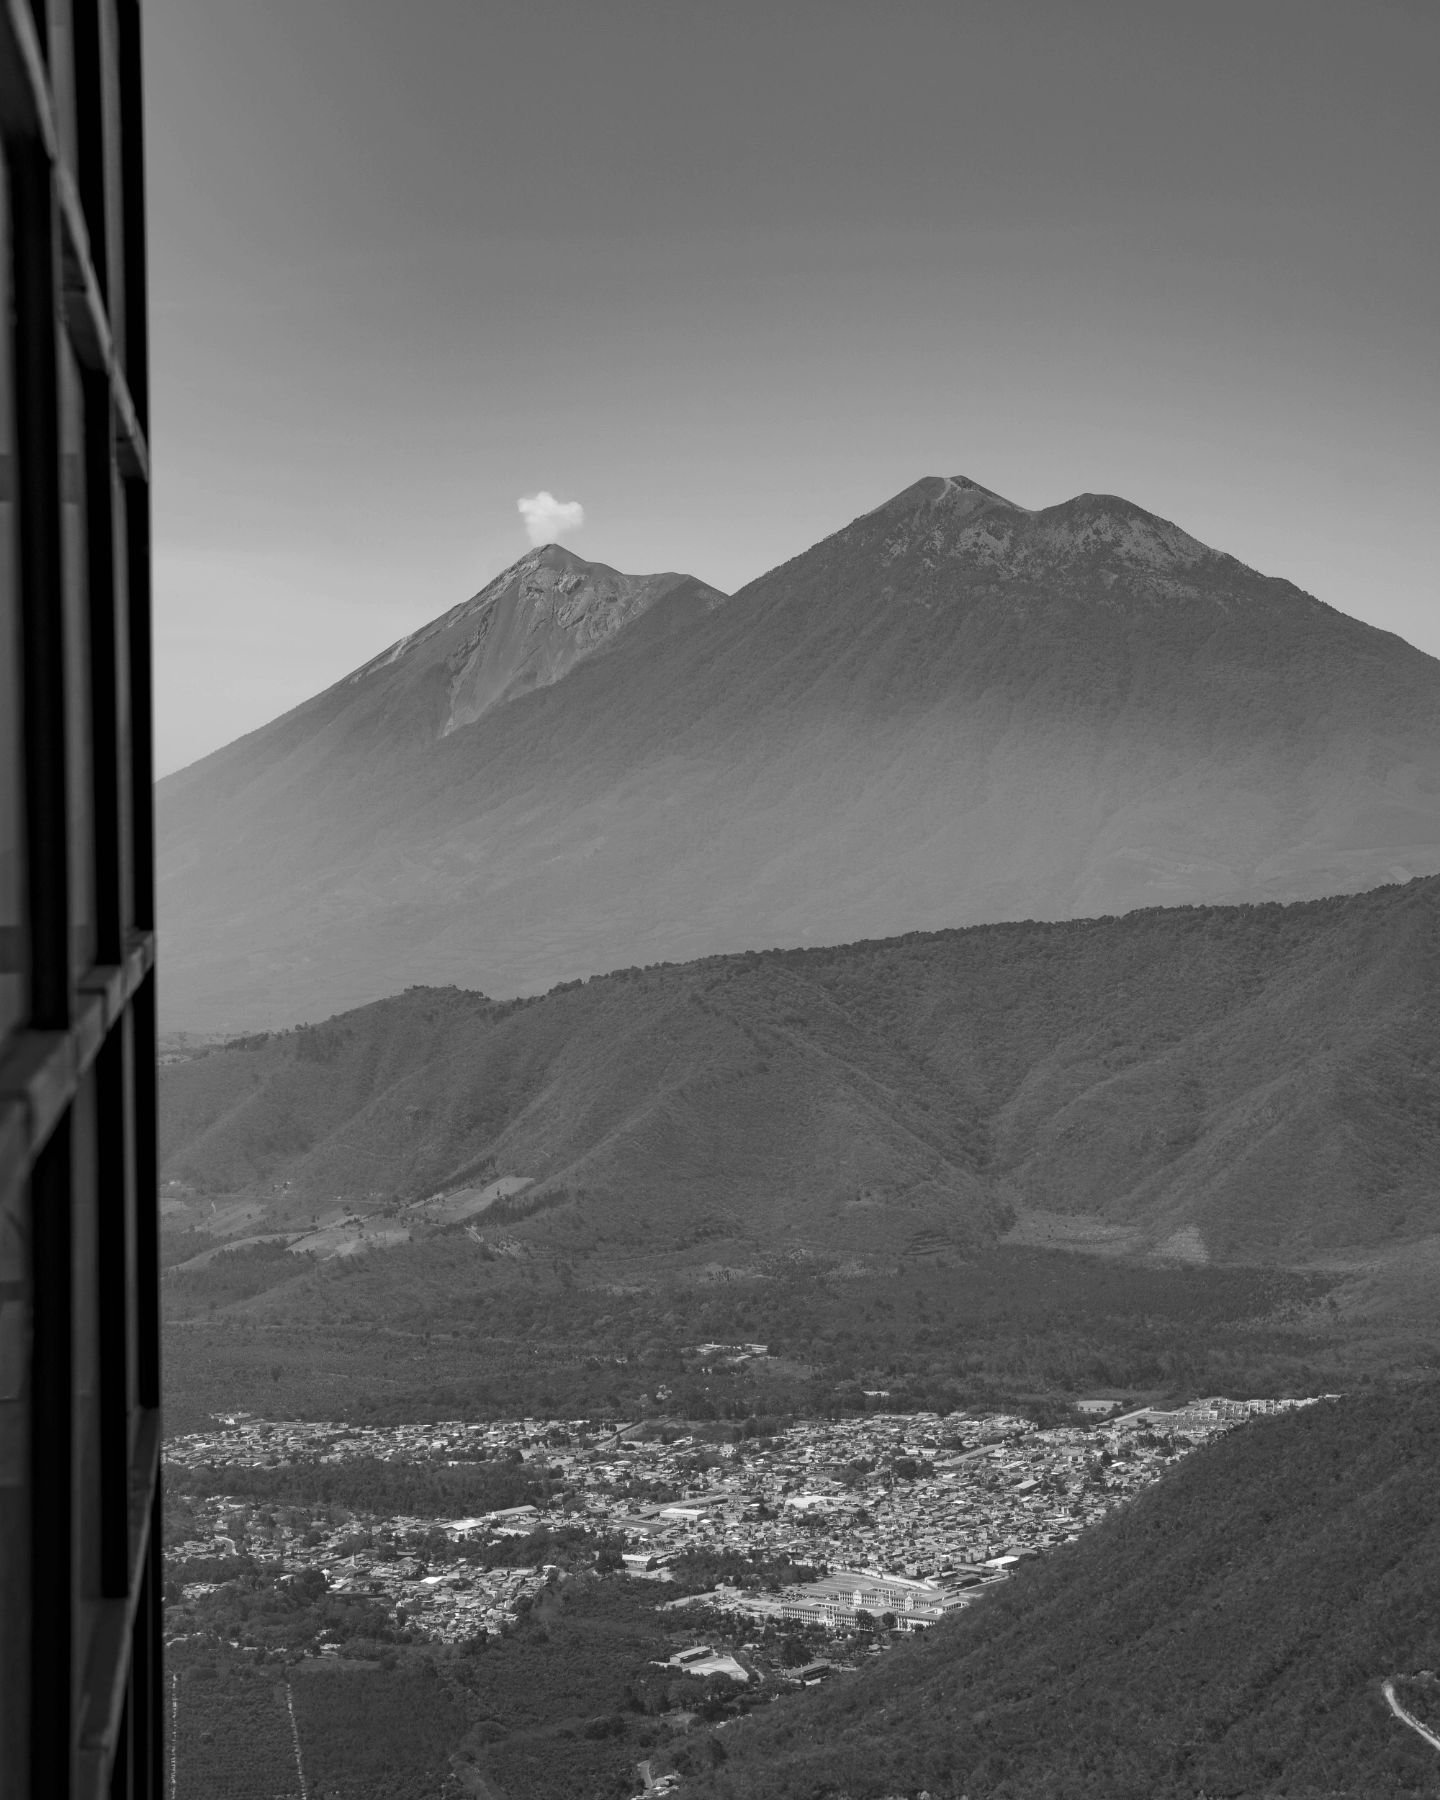 3 of my favorites volcano shots I took in Antigua, Guatemala in February 🫶🏽

First one was taken at the @altamiraoriole
Great great place to visit with your friends and family. Lots to see including this incredible view of the volcano. A must! 

Th